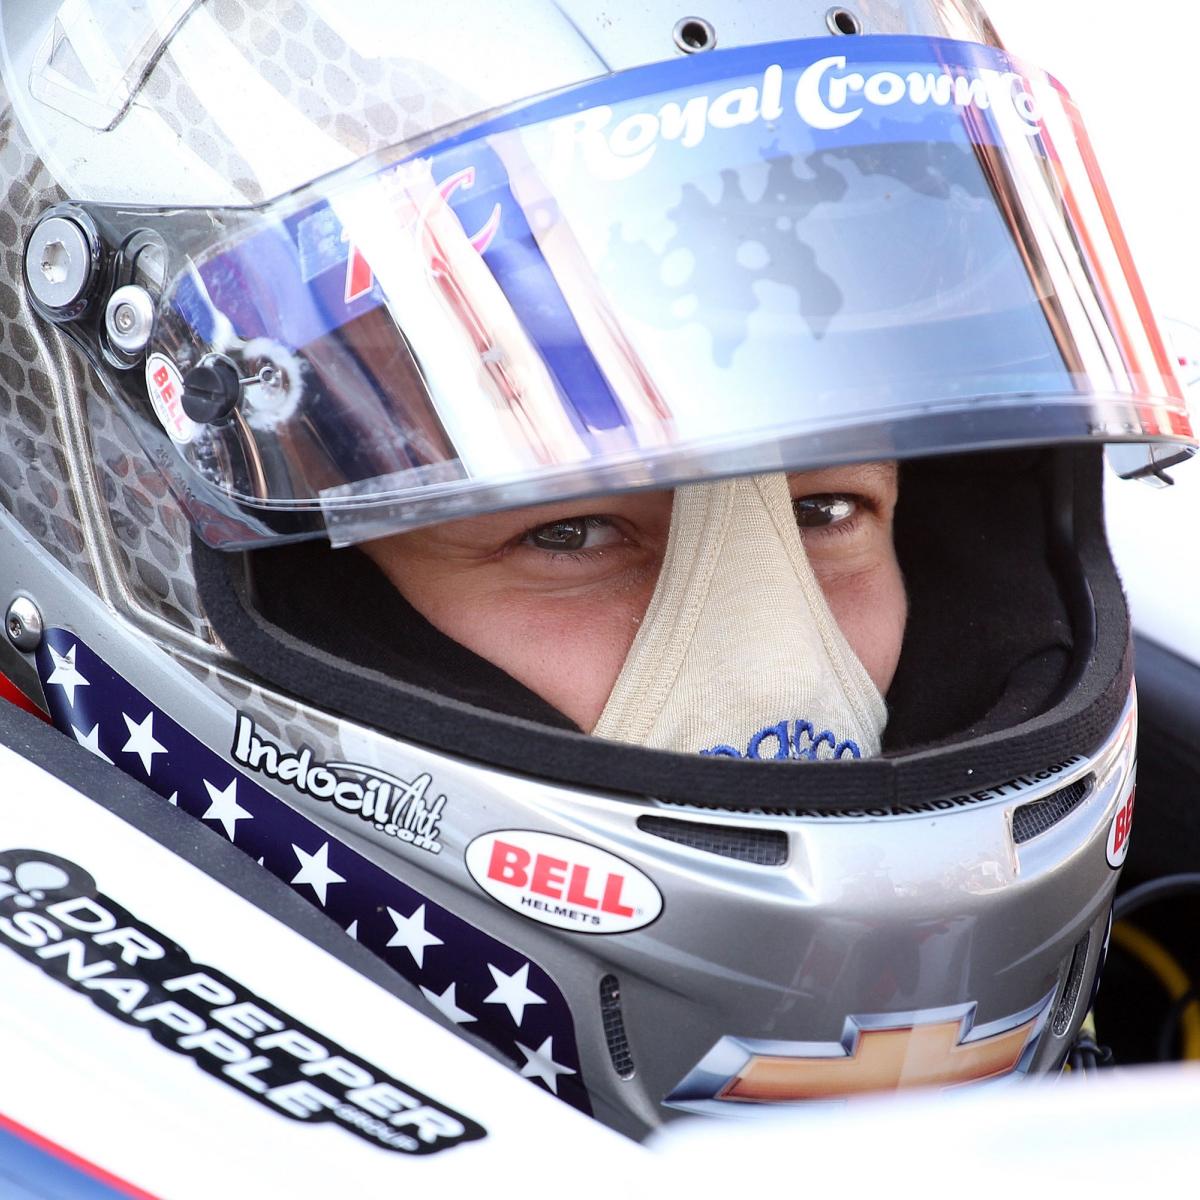 Indy 500 Live Leaderboard Updates on Marco Andretti and Top Drivers